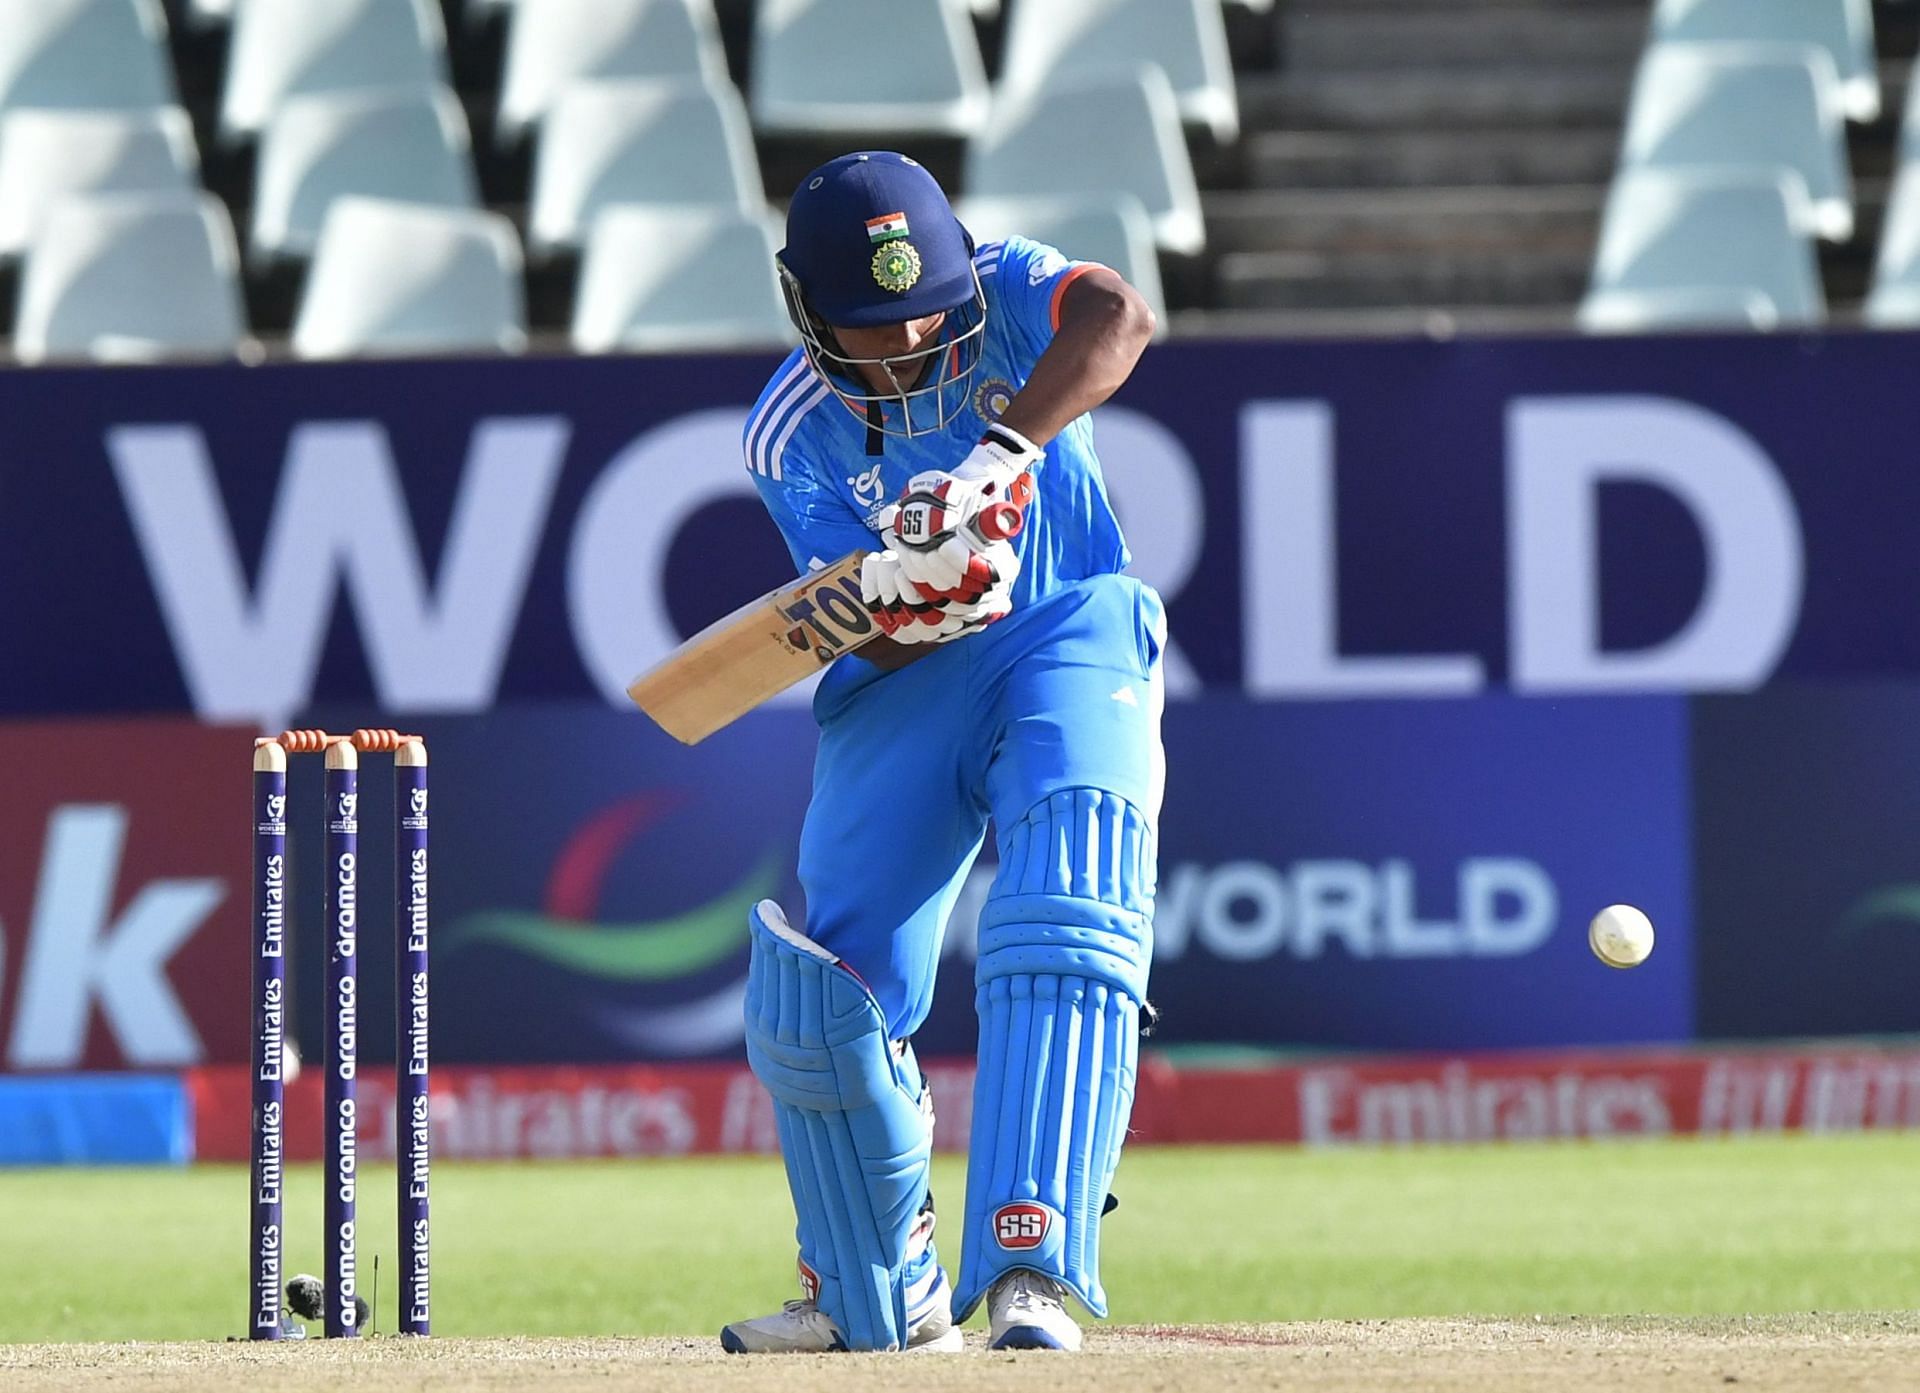 Sachin Dhas played a terrific innings in the semifinal against South Africa. (Pic: Getty Images)